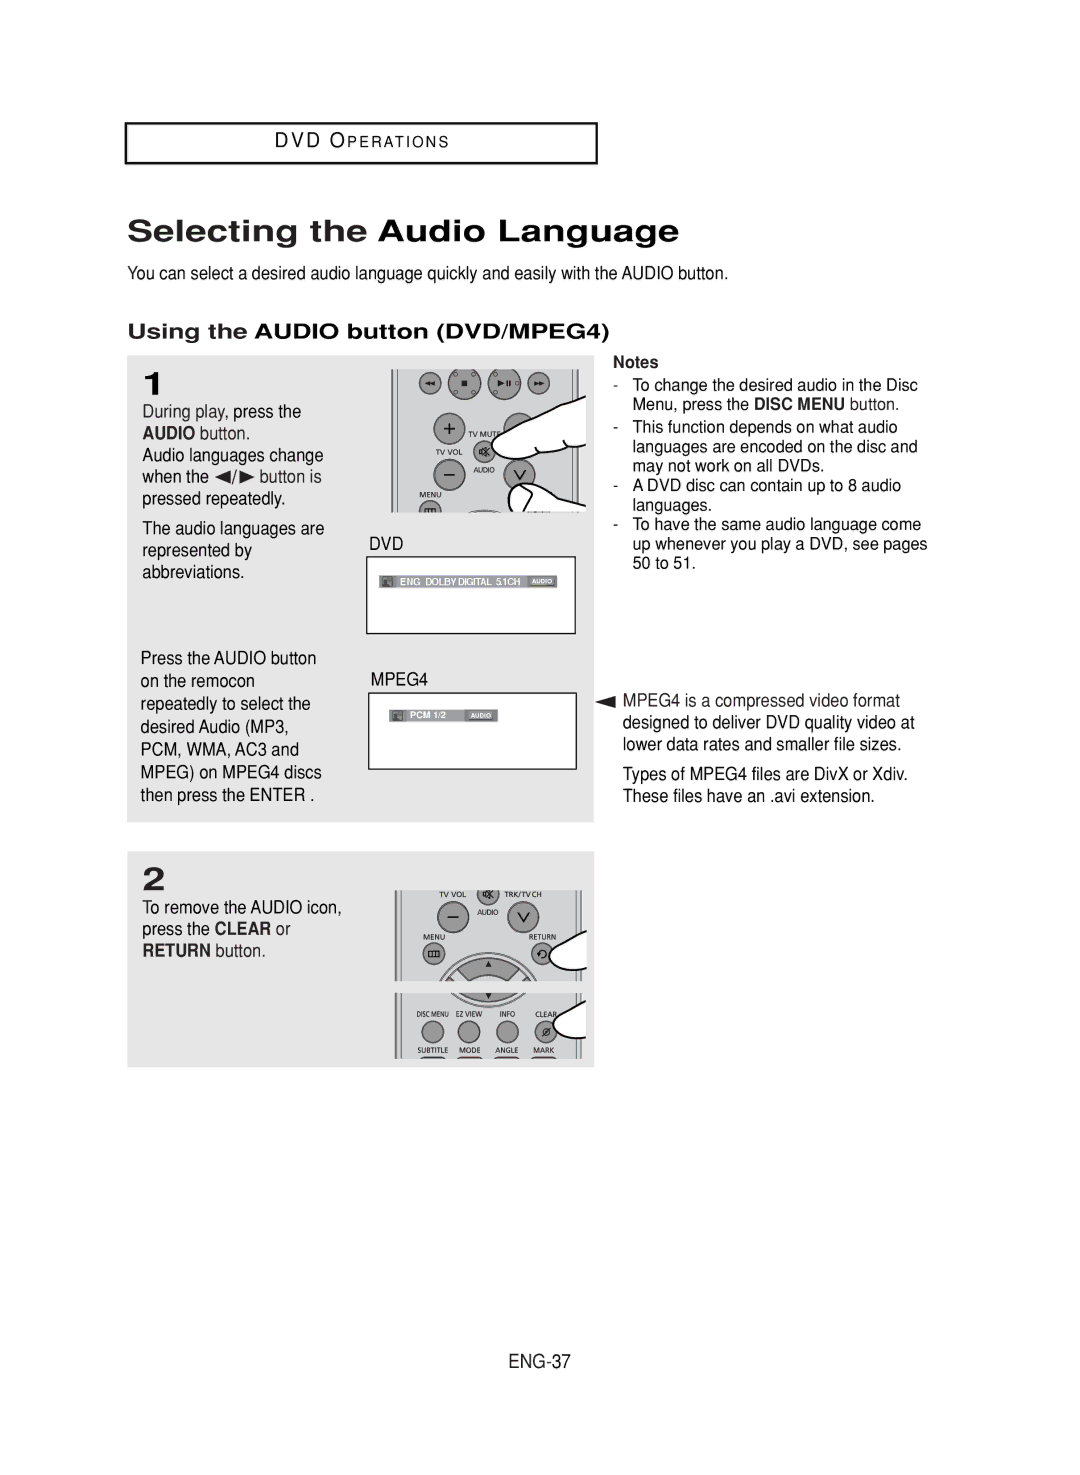 Samsung DVD-V9800 instruction manual Selecting the Audio Language, Using the Audio button DVD/MPEG4, ENG-37 